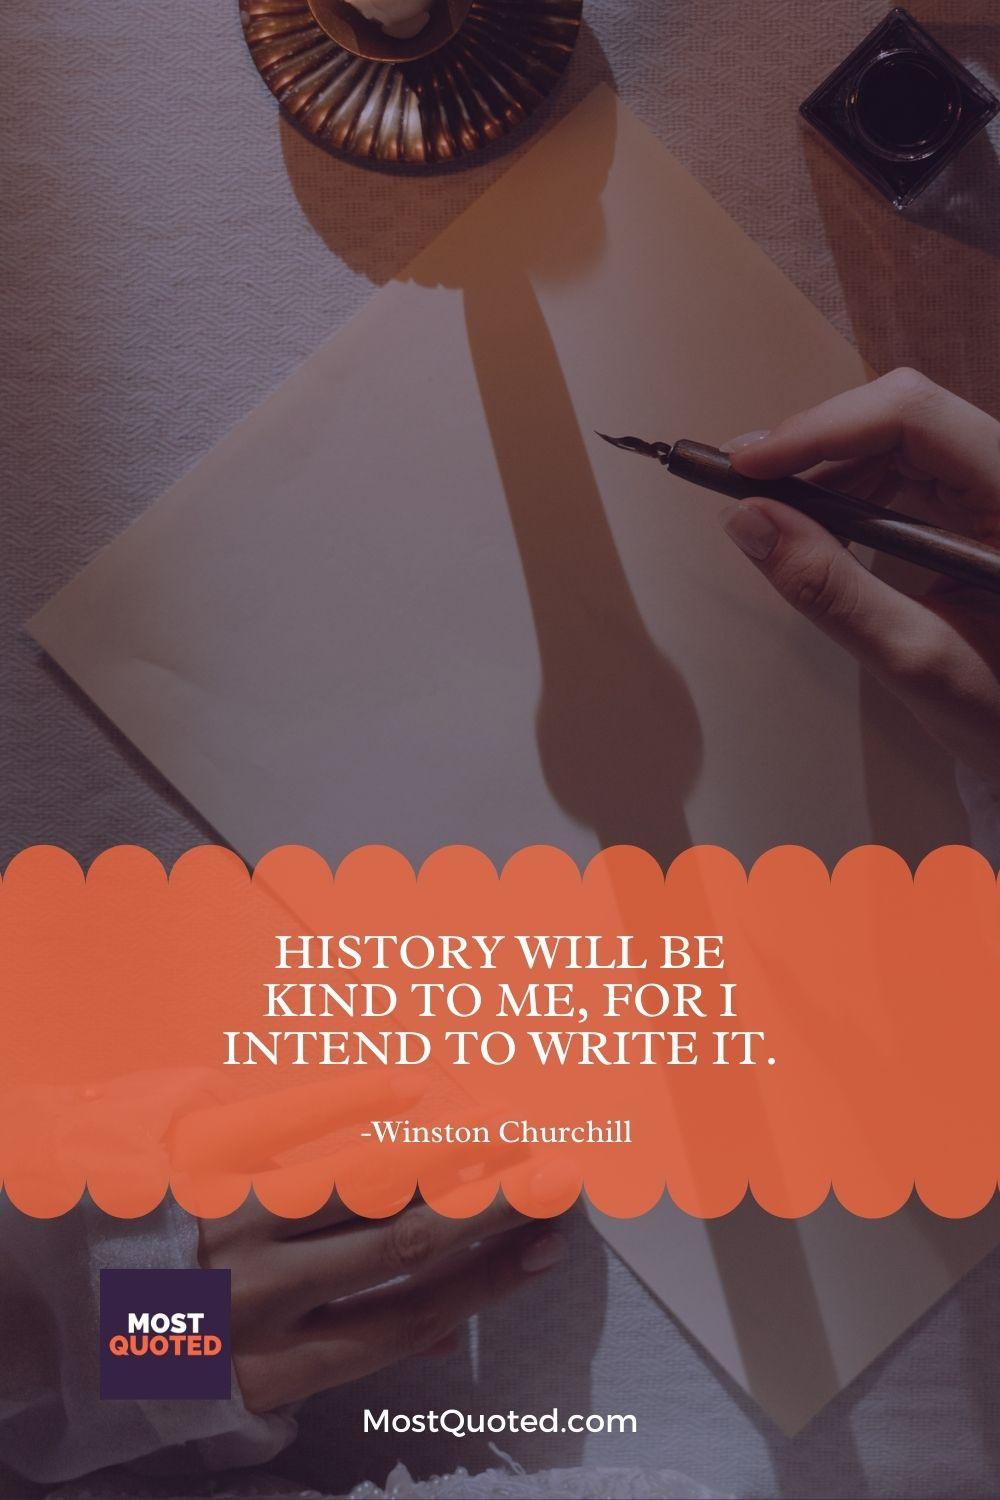 History will be kind to me, for I intend to write it. - Winston Churchill